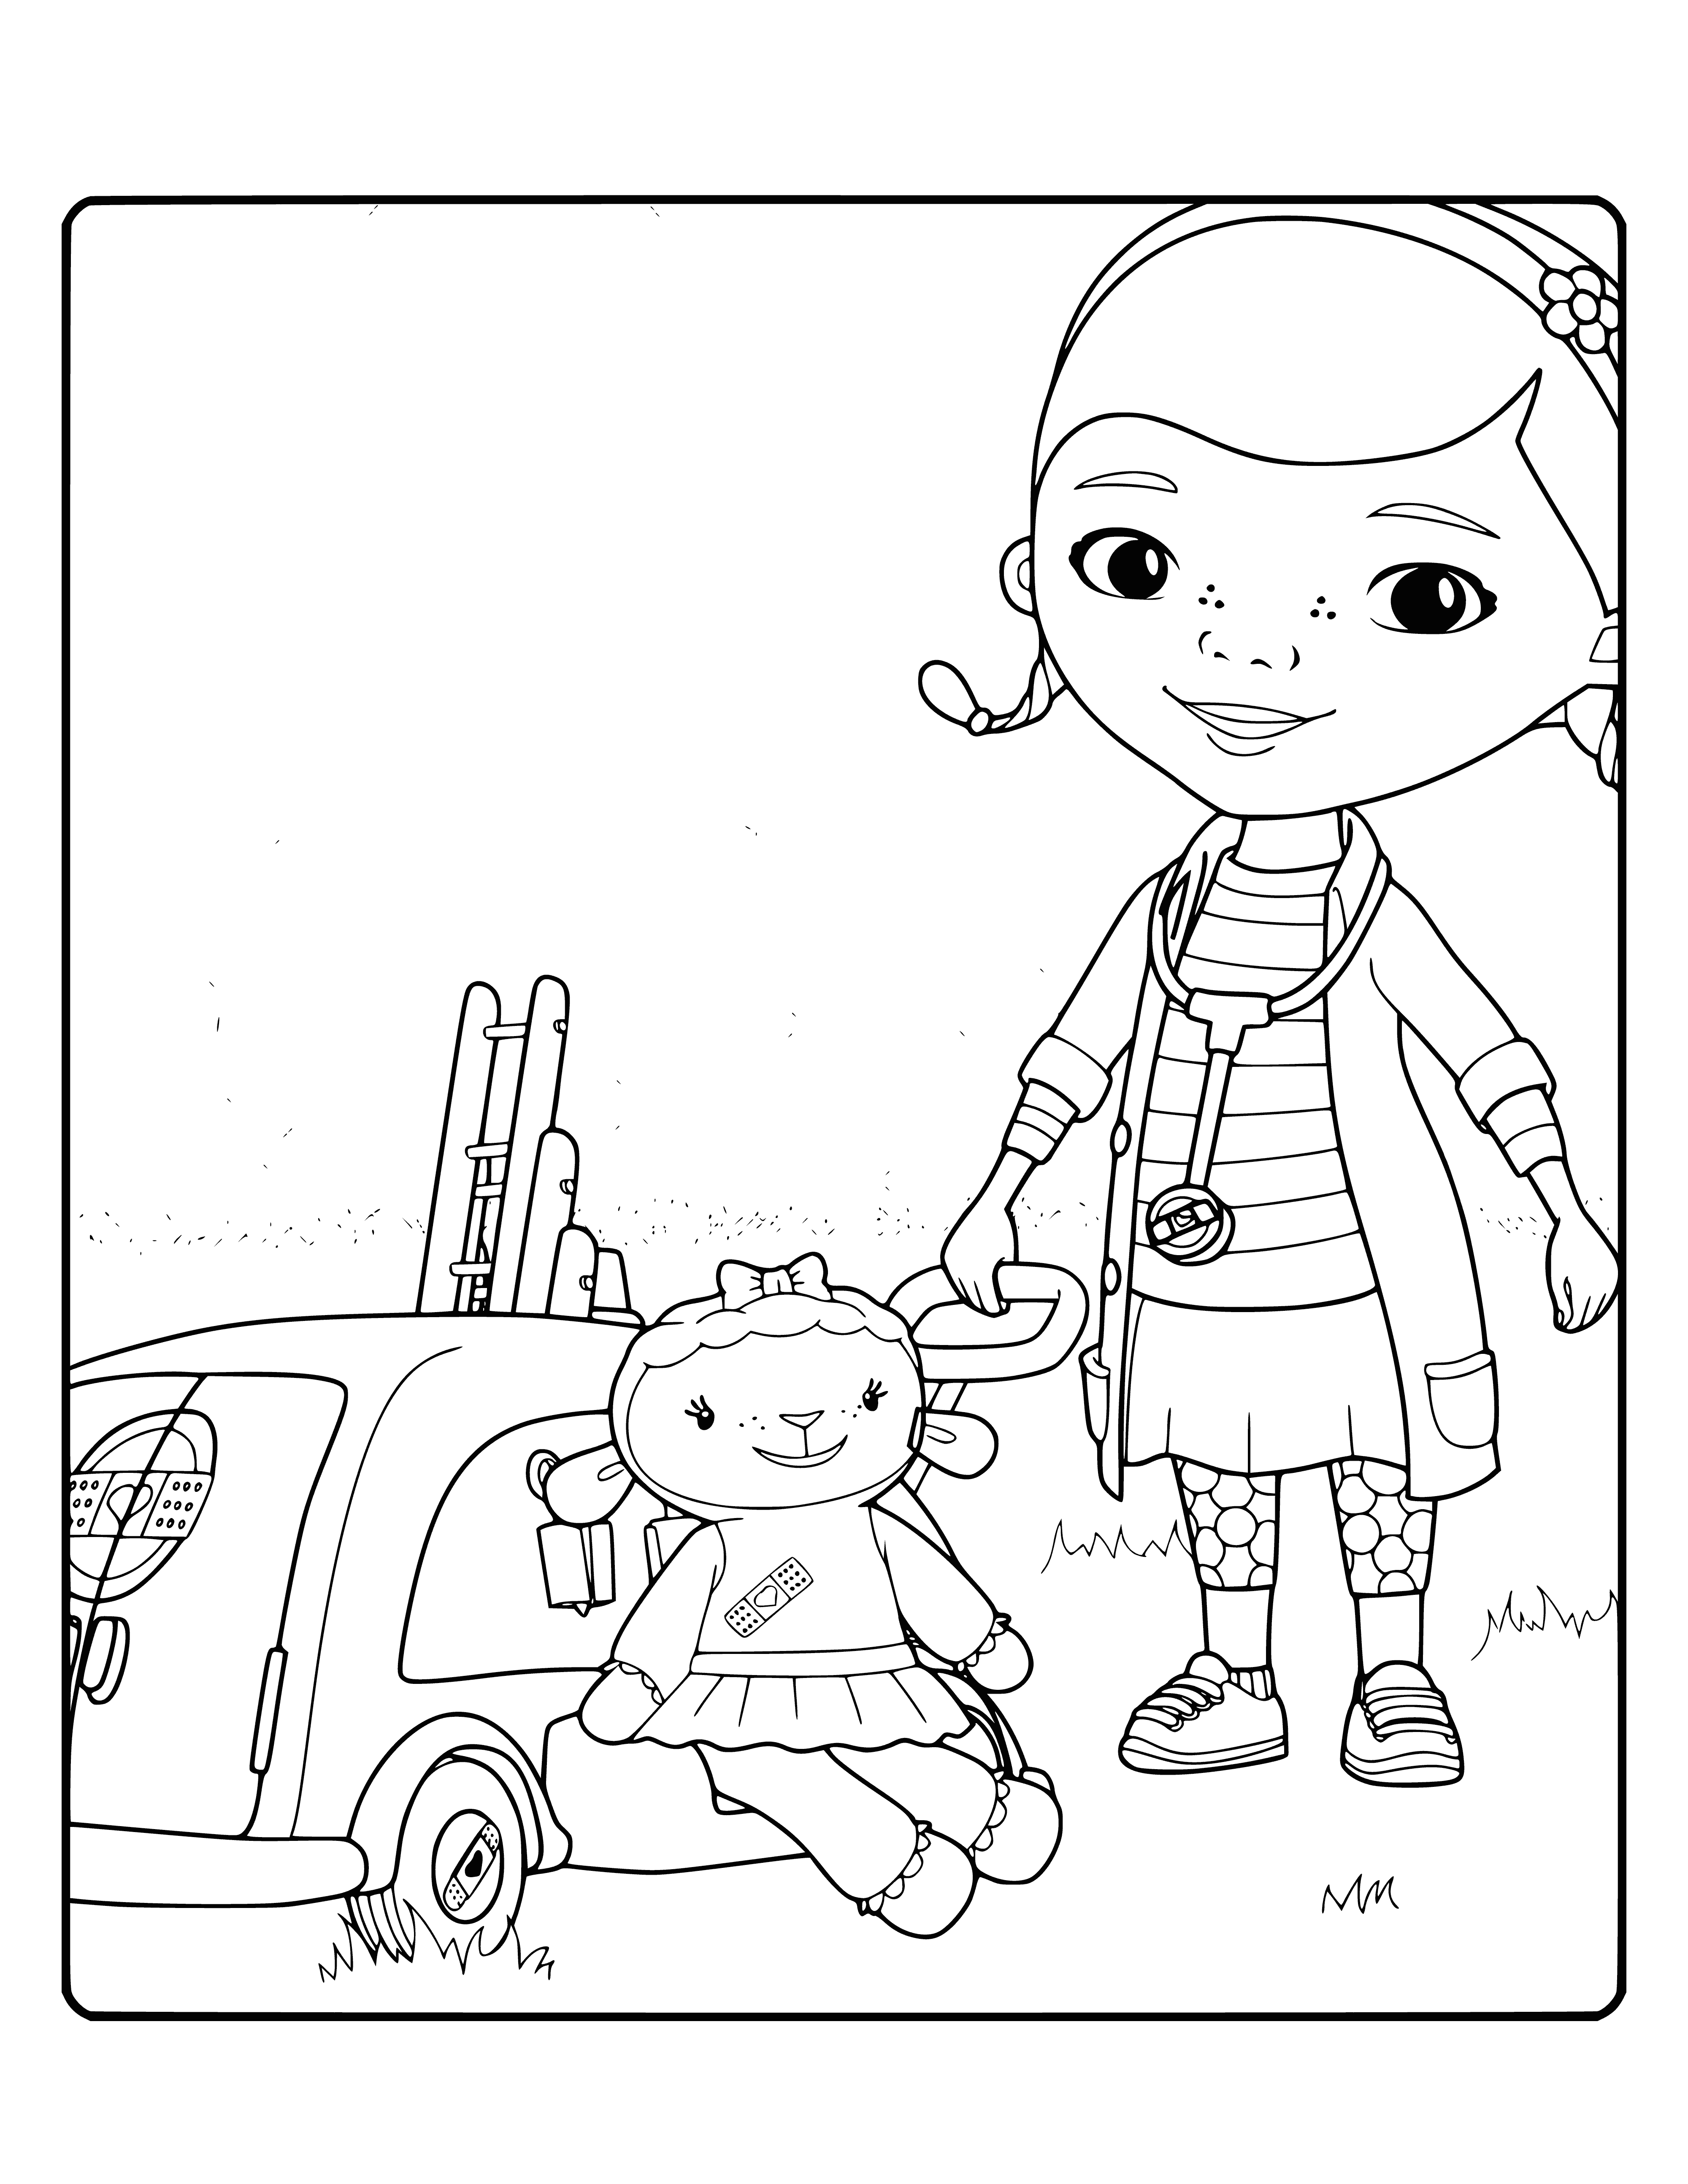 coloring page: Girl in a tutu and striped shirt plays and hugs a lamb with blue bow; laughter abounds.